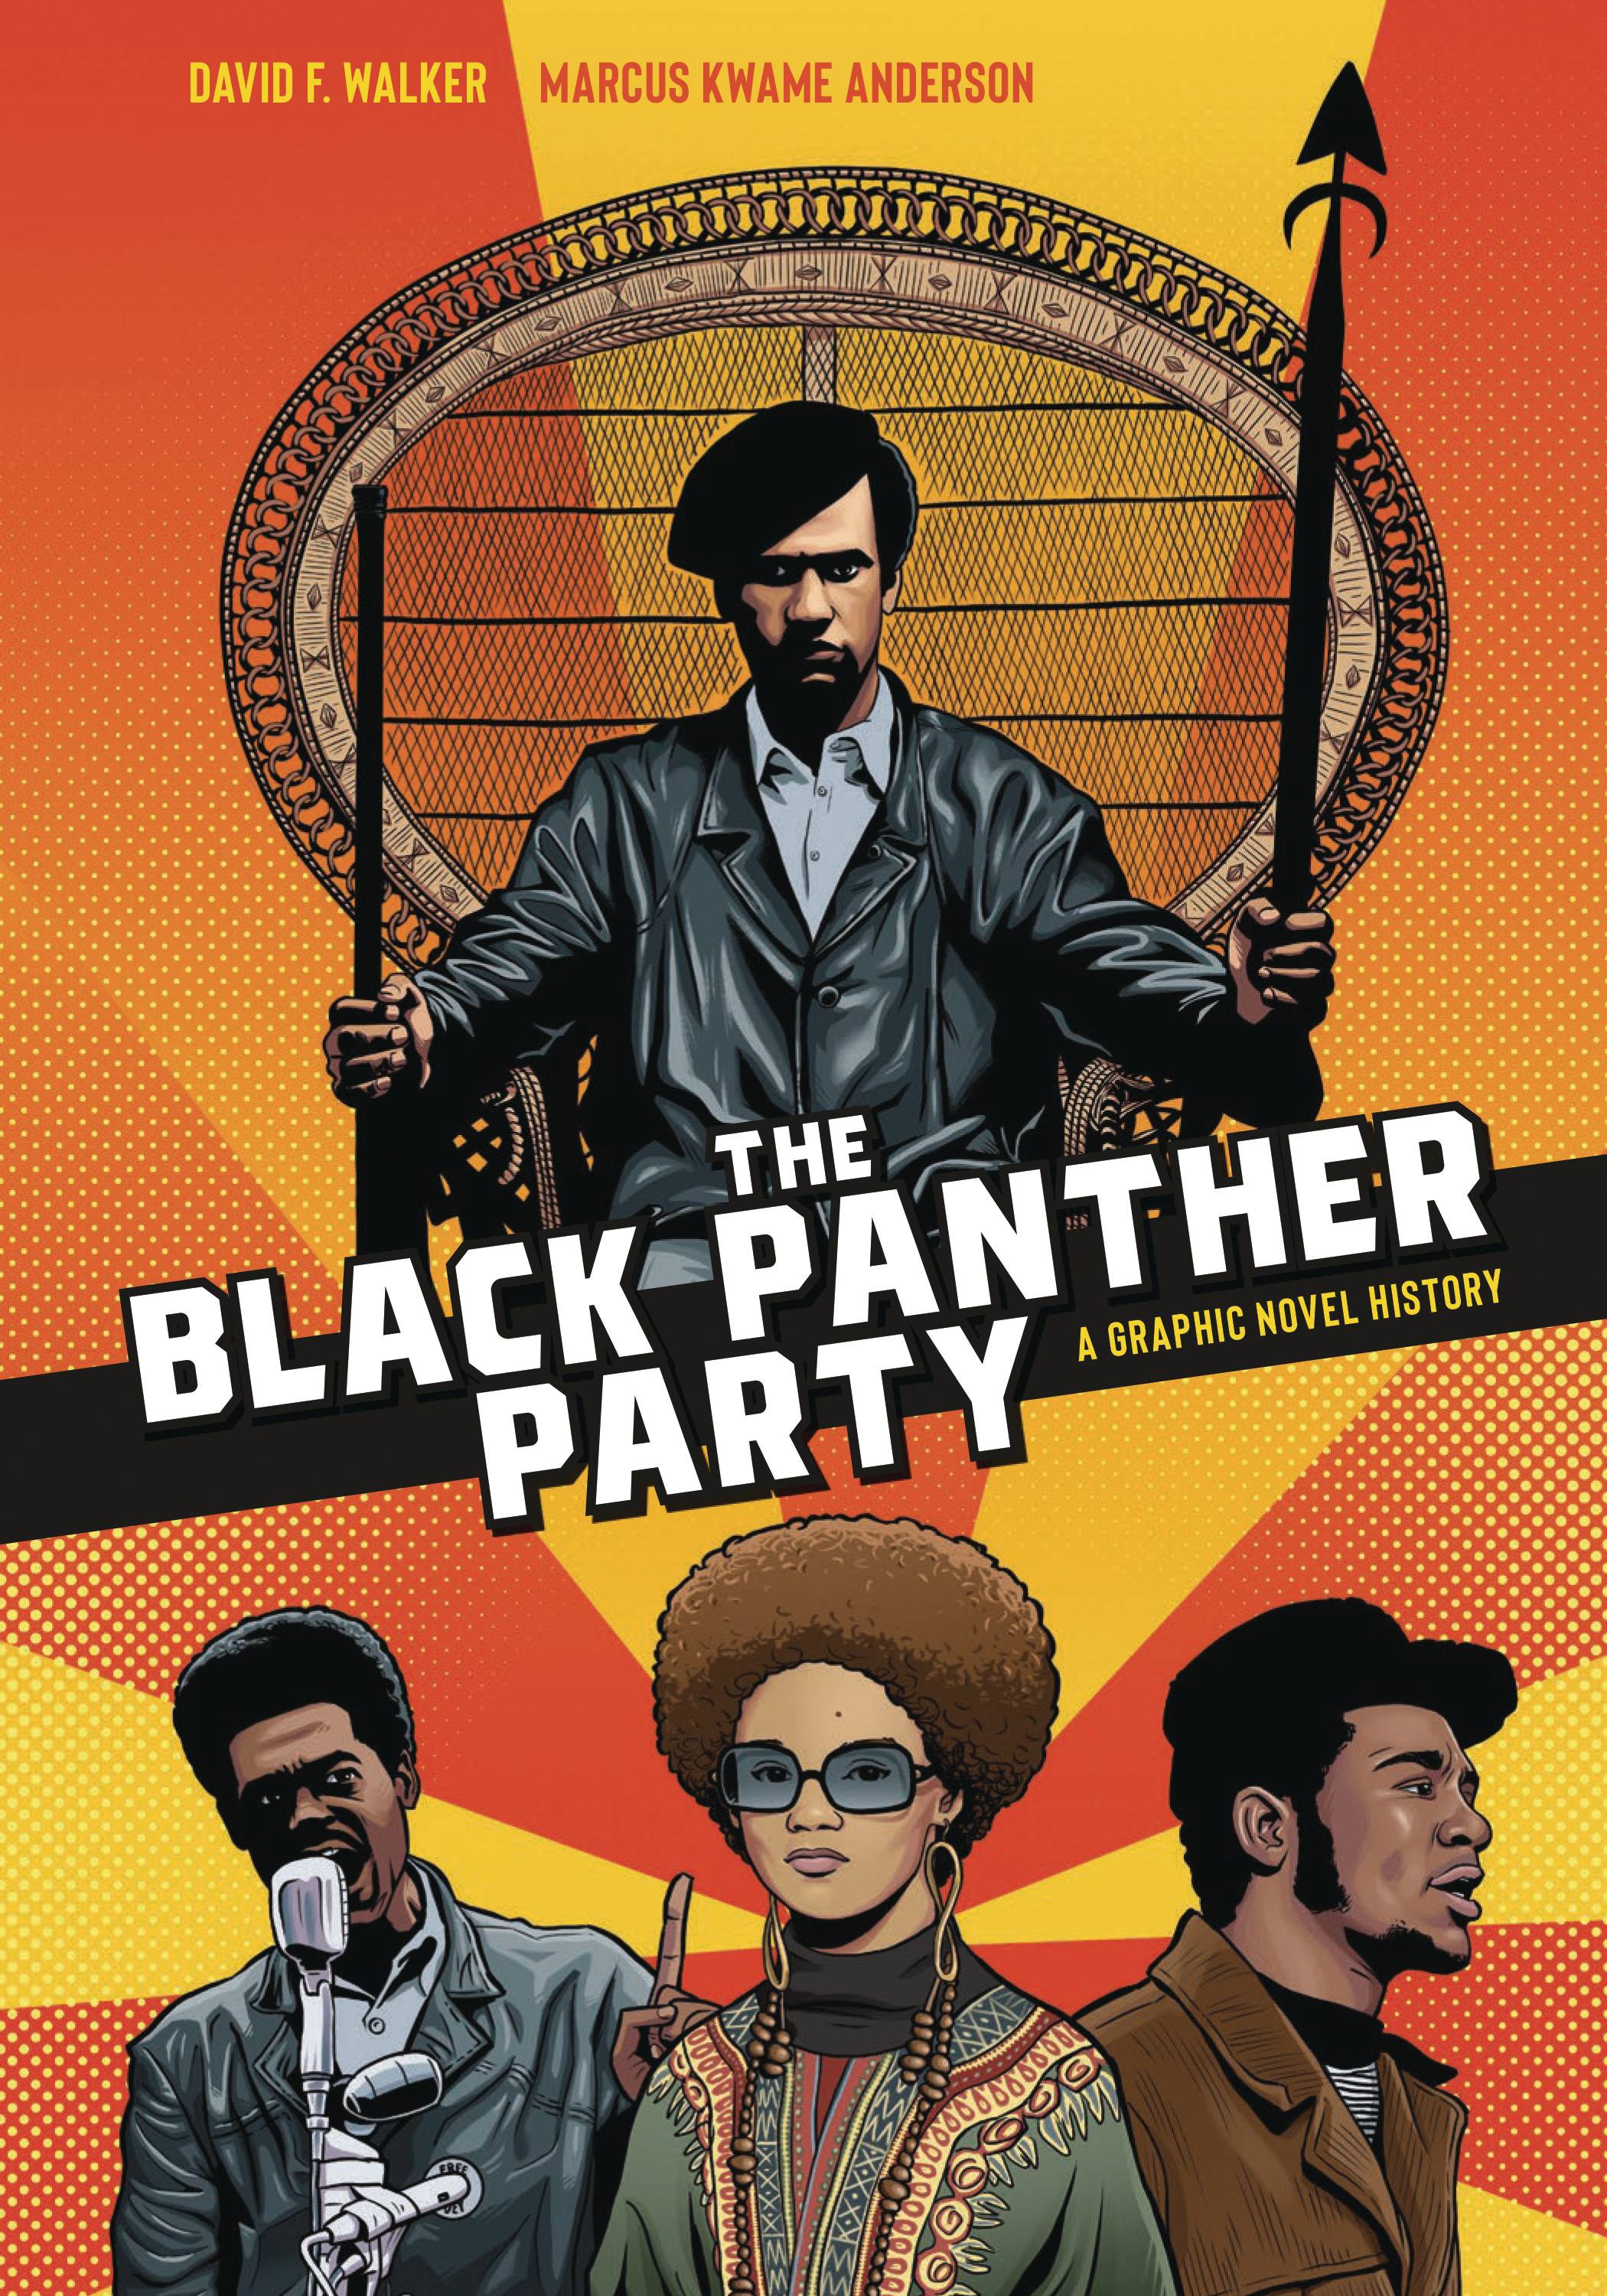 David F. Walker, Marcus Kwame Anderson: Black Panther Party (2021, Potter/Ten Speed/Harmony/Rodale)